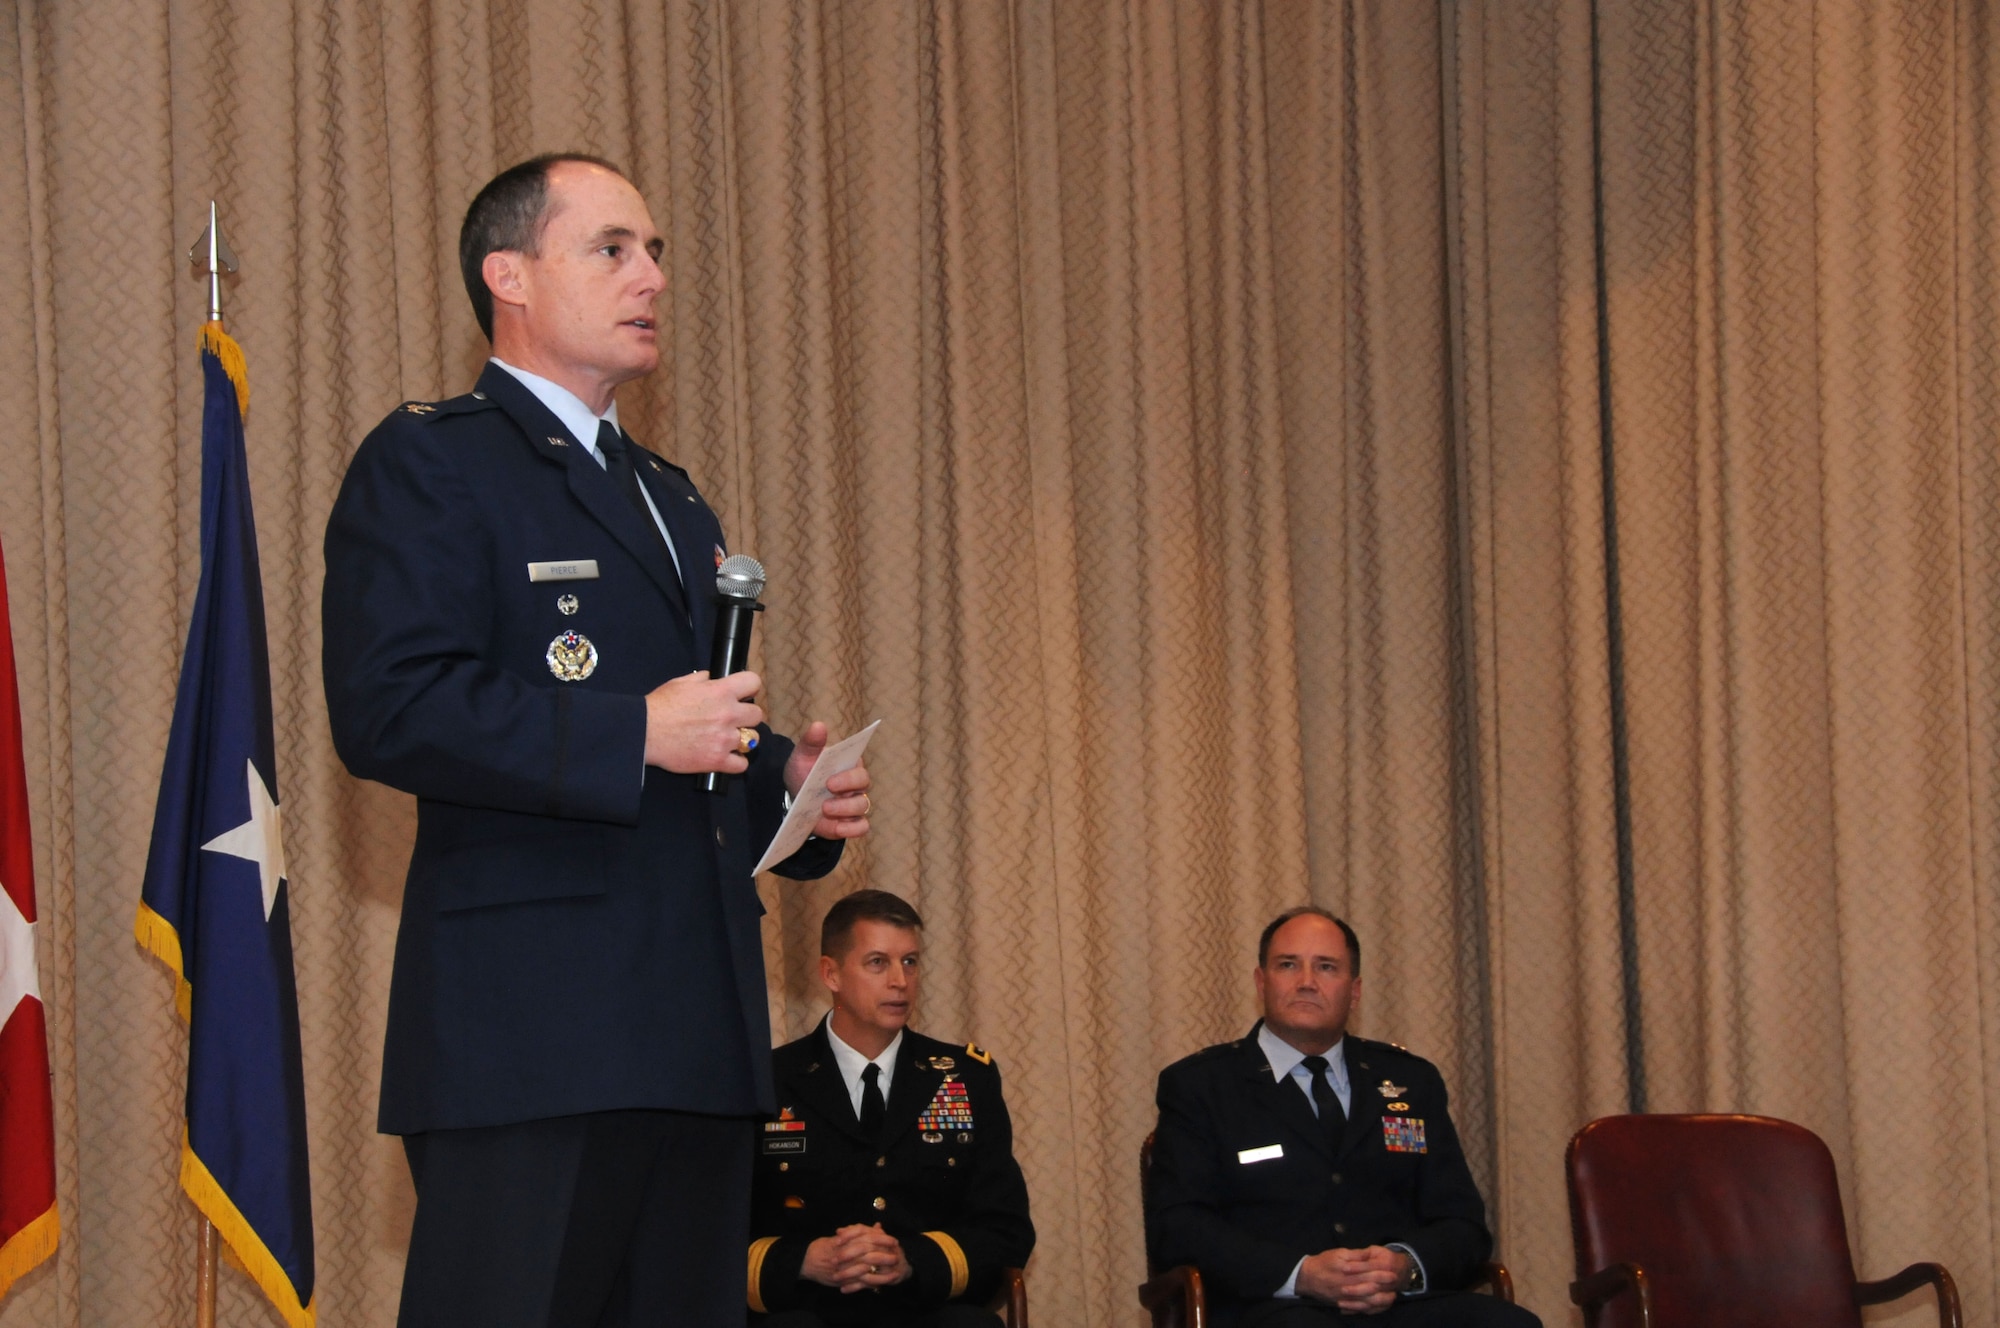 U.S. Air Force Colonel Kirk Pierce, 173rd Fighter Wing Commander, speaks to the audience about his vision for the future of the wing during an Assumption of Command ceremony at Kingsley Field, Klamath Falls, Ore. Jan. 10, 2015.  Pierce has 26 years of military service and was previously assigned as the Director of Plans and Programs for the National Guard Bureau. (U.S. Air National Guard photo by Senior Airman Penny Snoozy/Released)